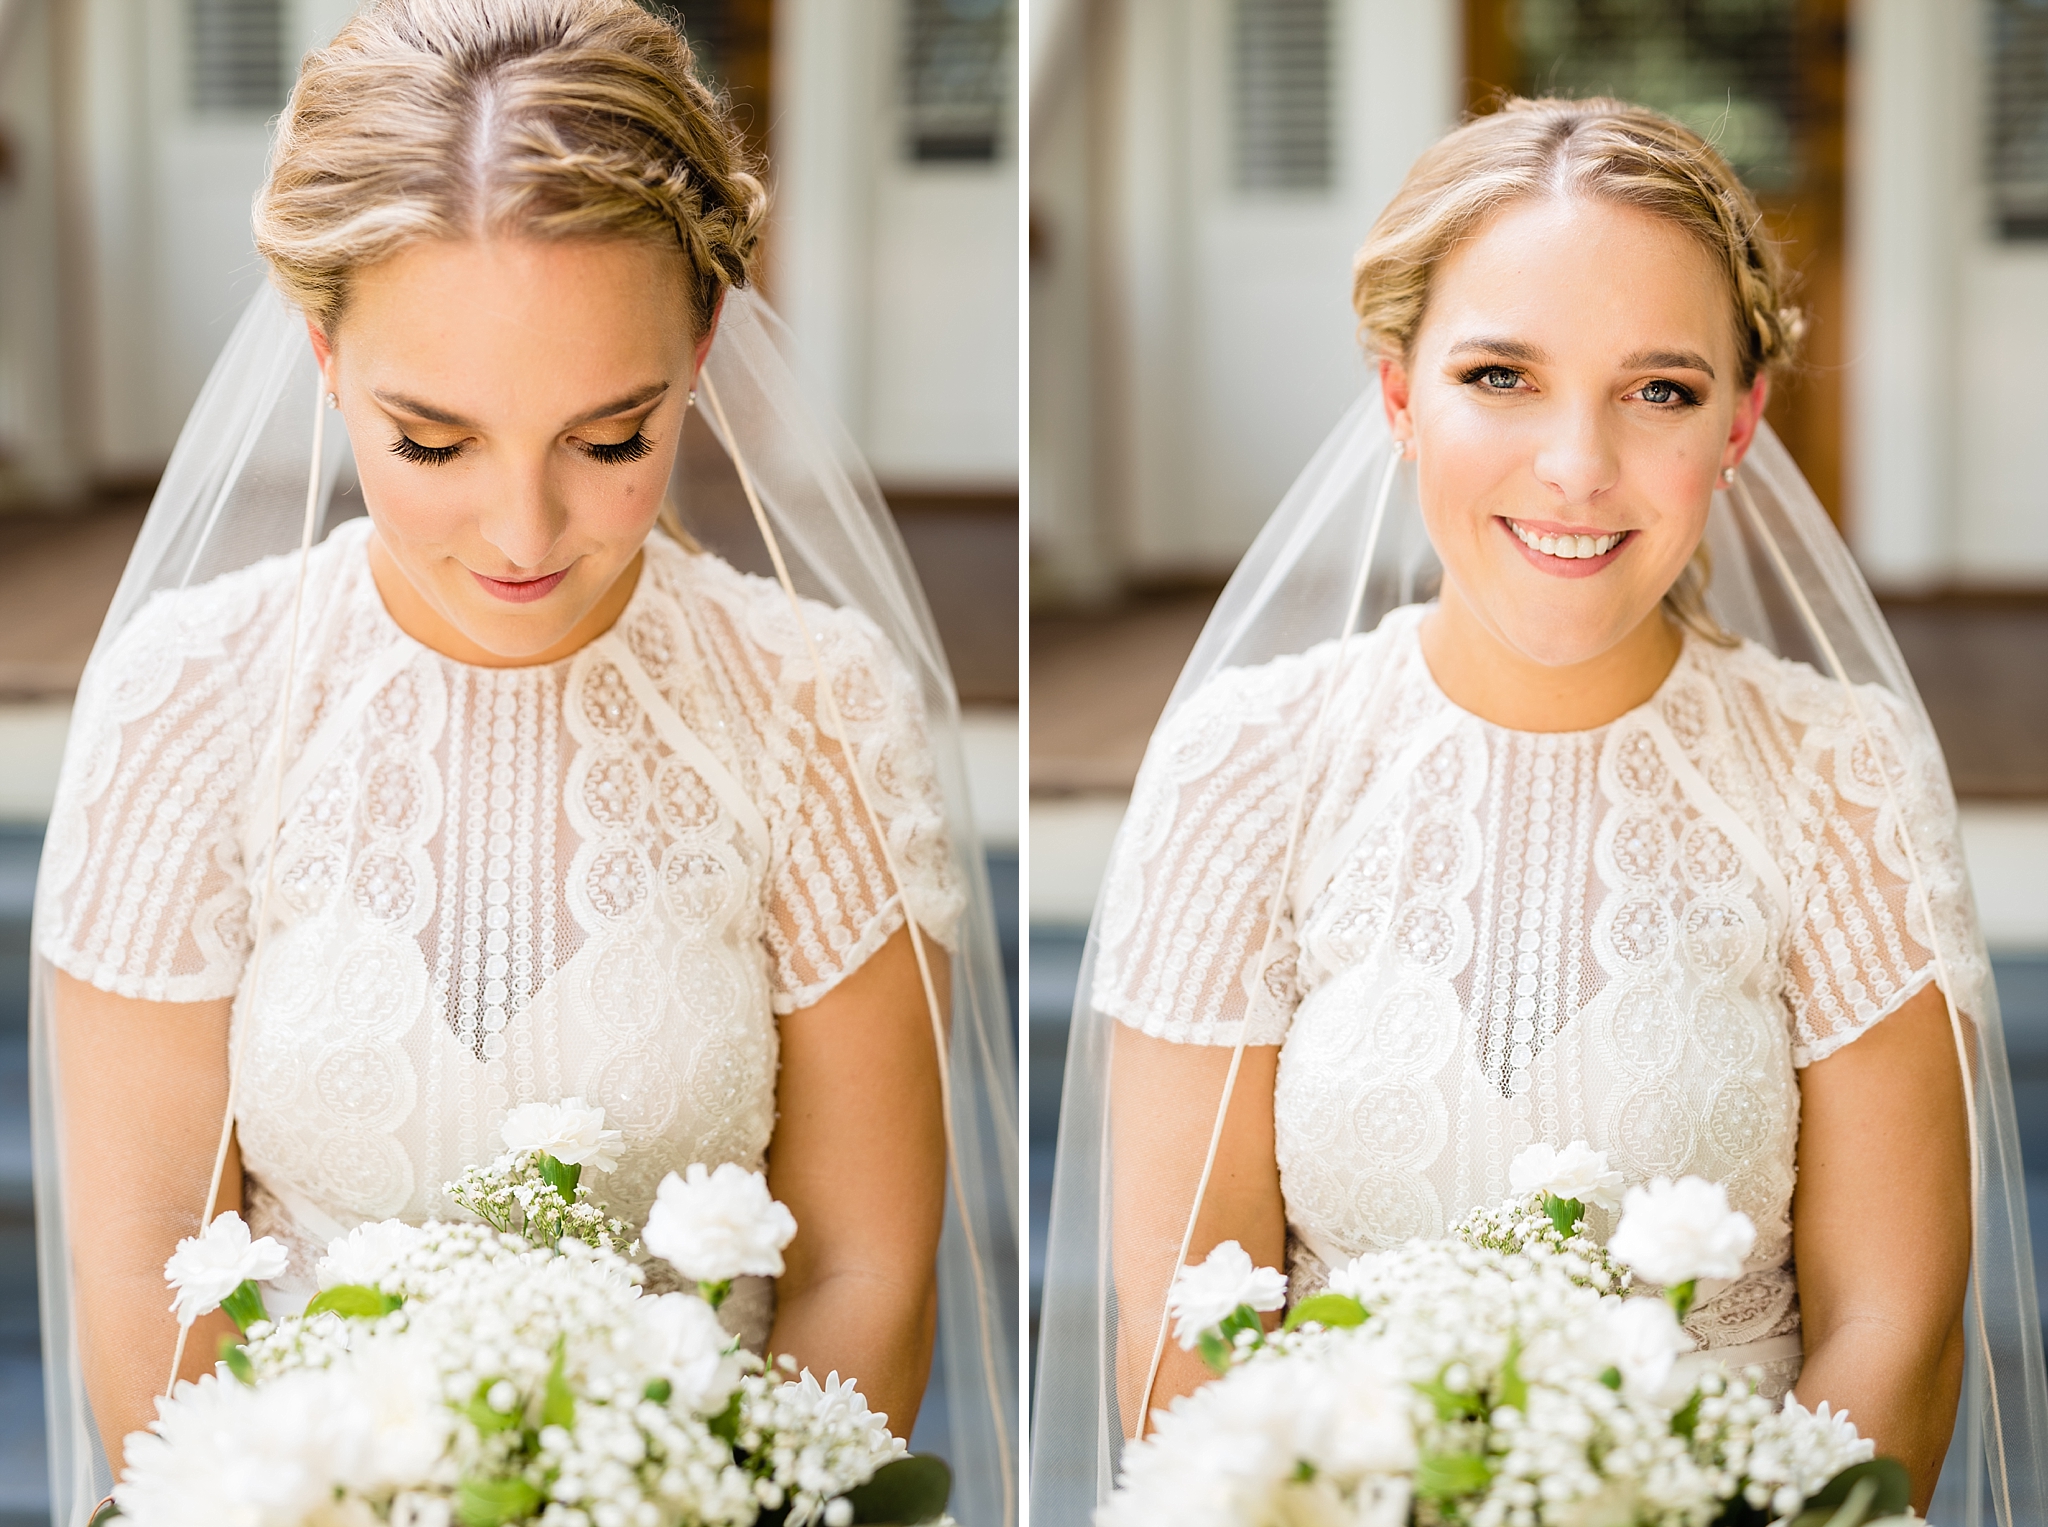 Bridal portraits from Raleigh Wedding Photographer, the bride is wearing a lace dress with sleeves and a veil. 